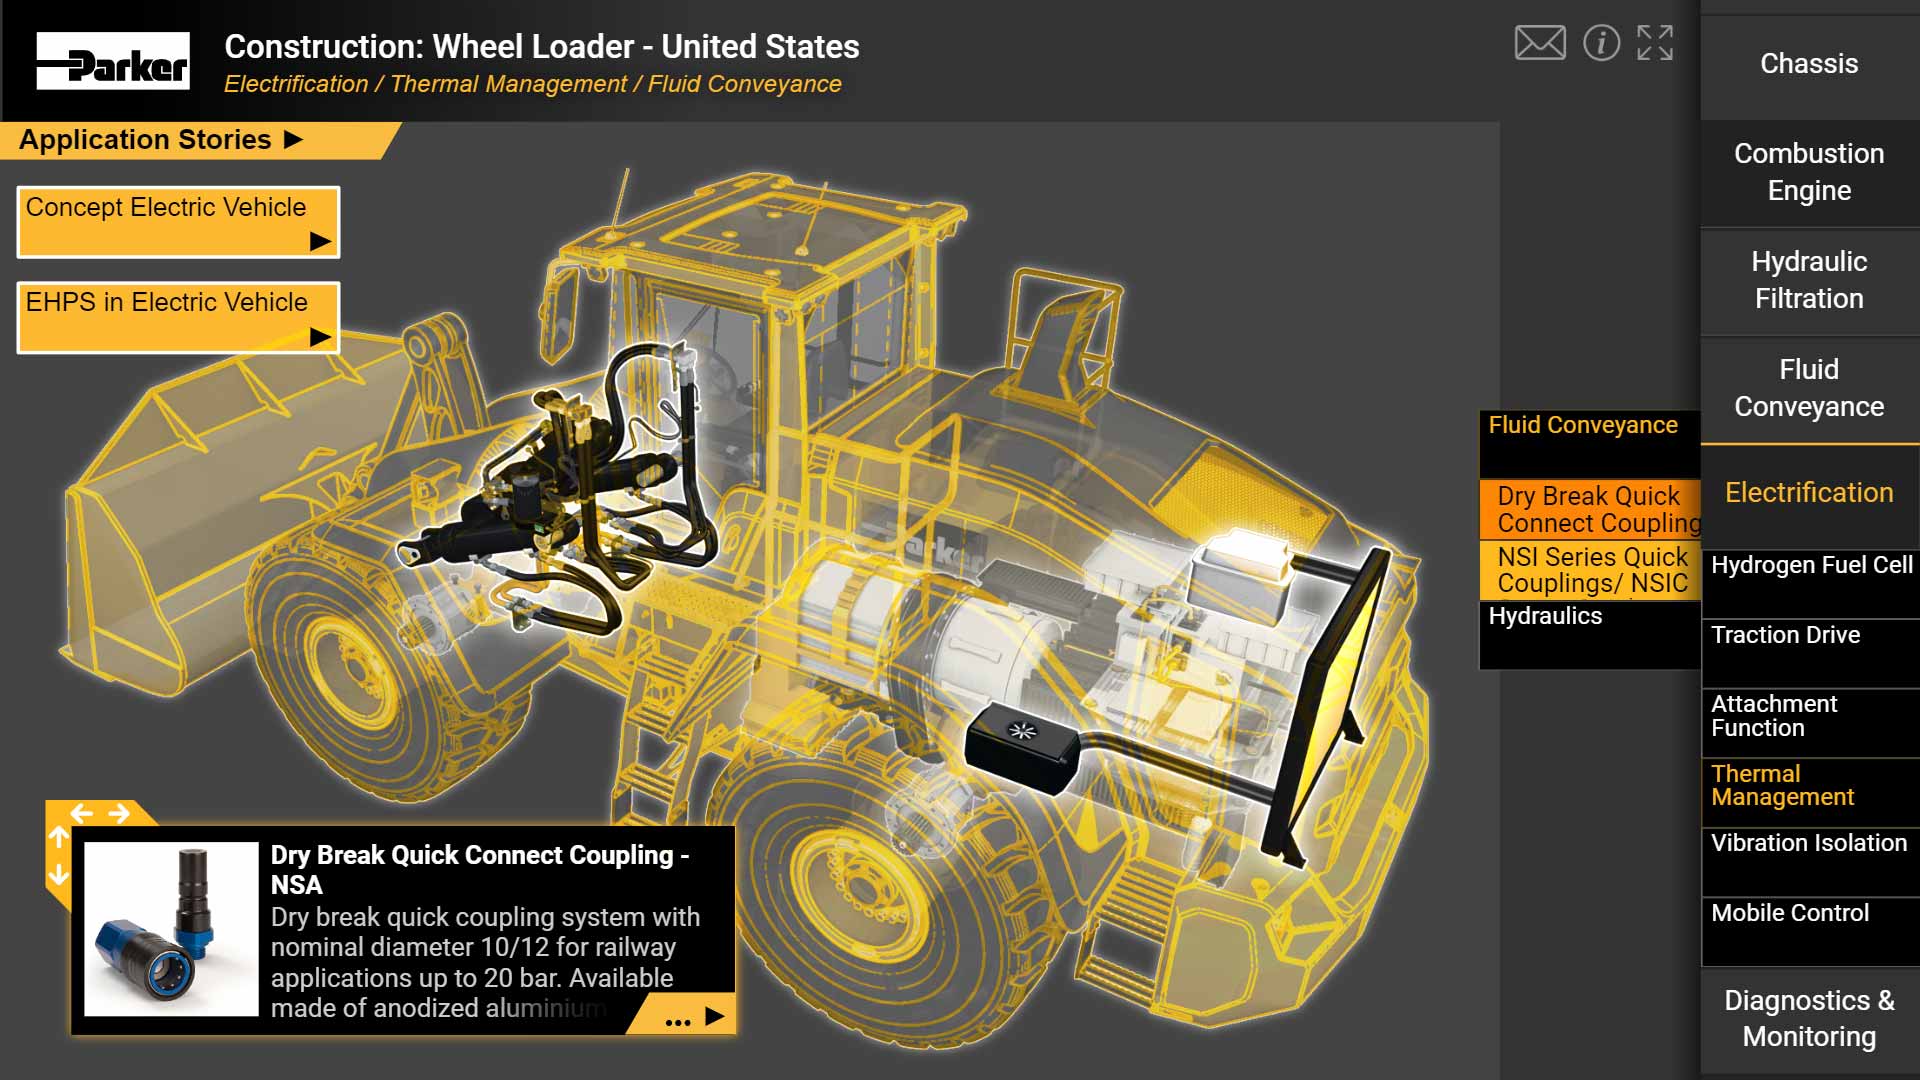 Construction Wheel Loader Equipment and Products